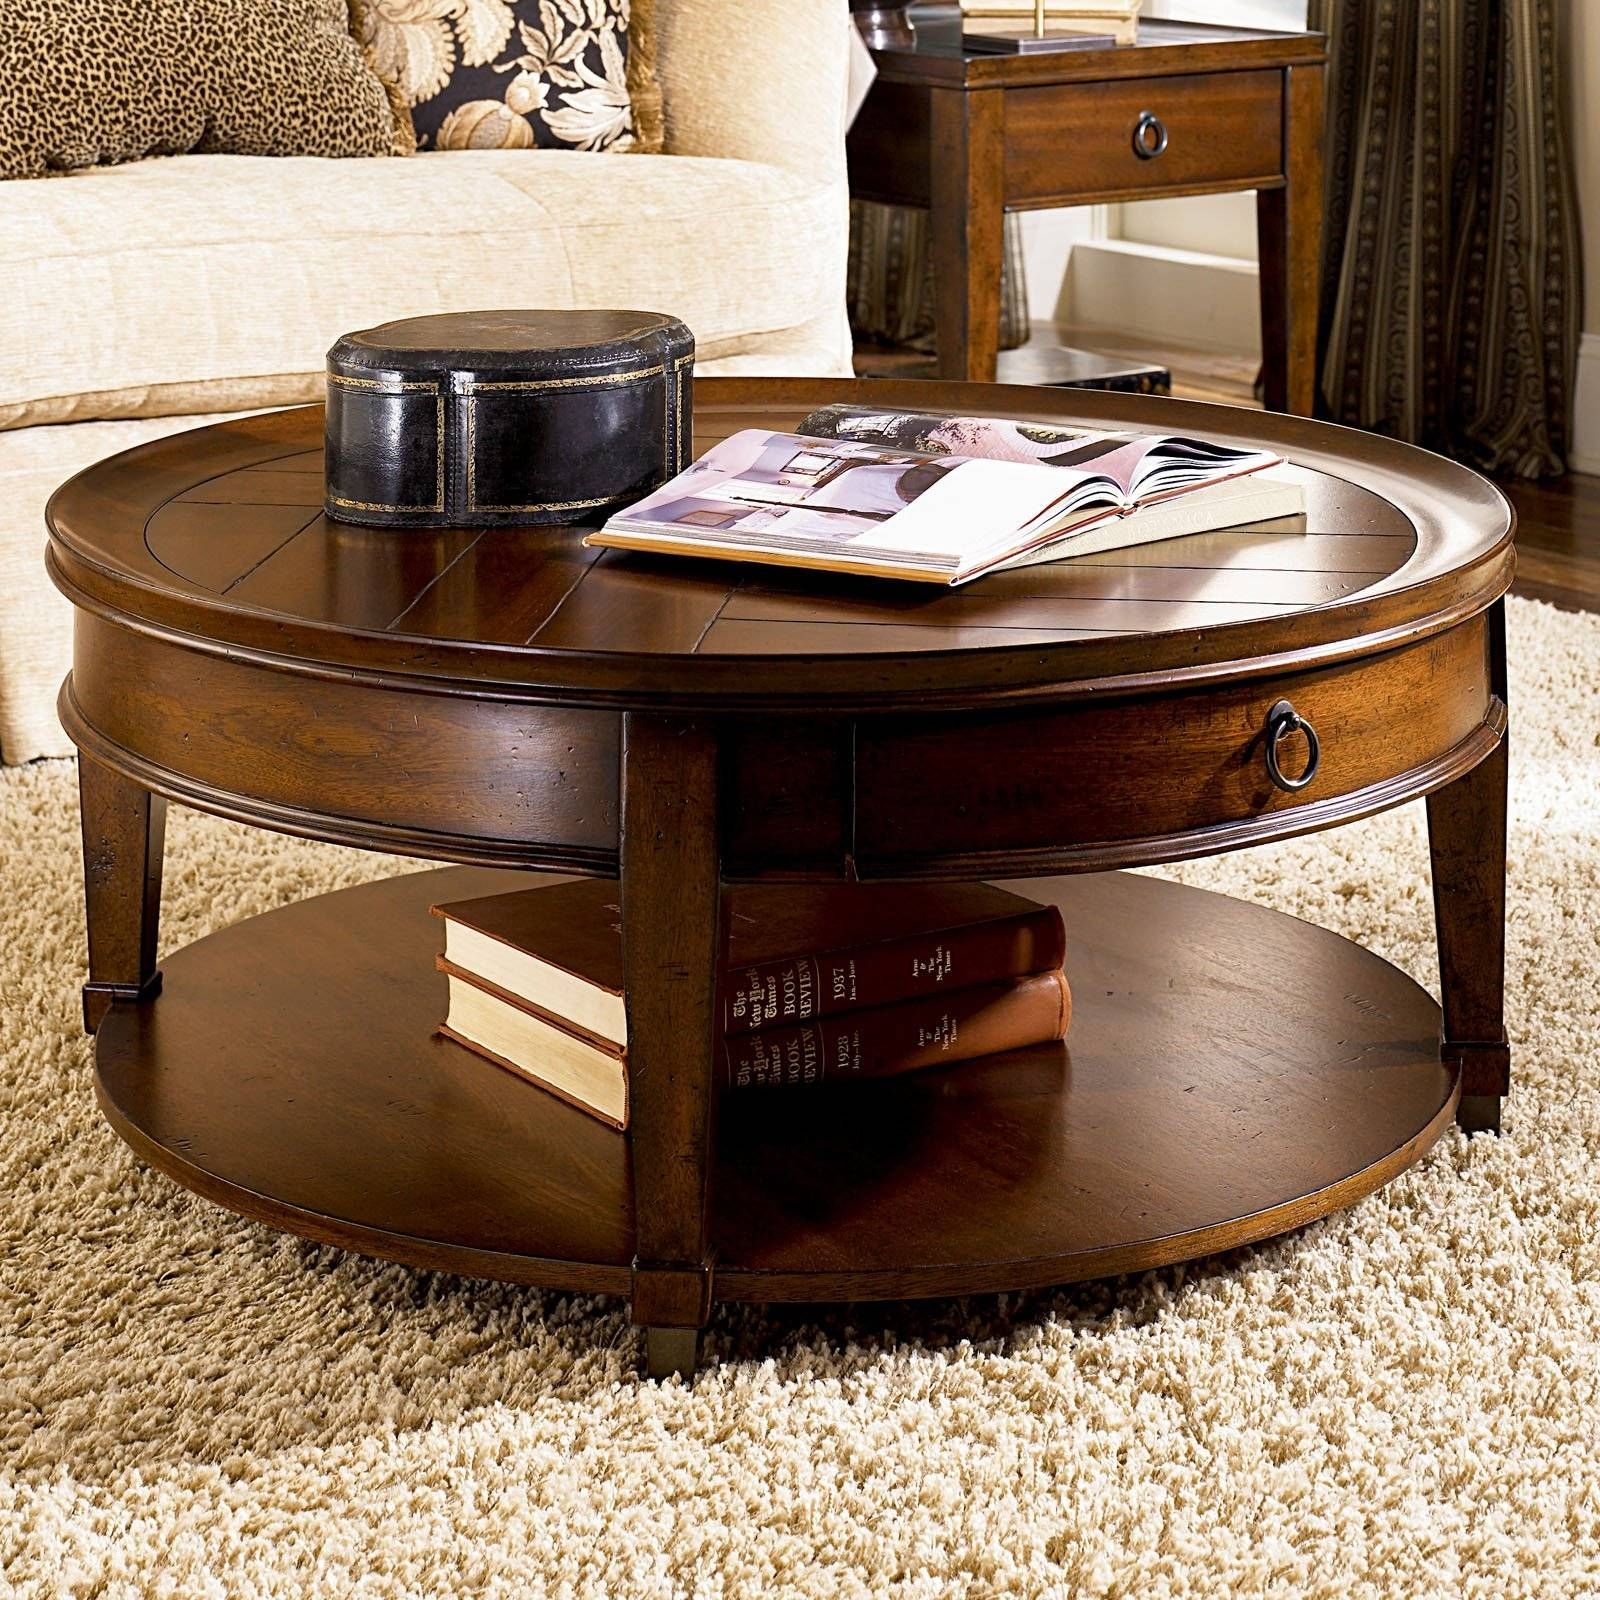 Hammary Sunset Valley Round Cocktail Table – Rich Mahogany | Hayneedle Intended For Mahogany Coffee Tables (View 9 of 30)